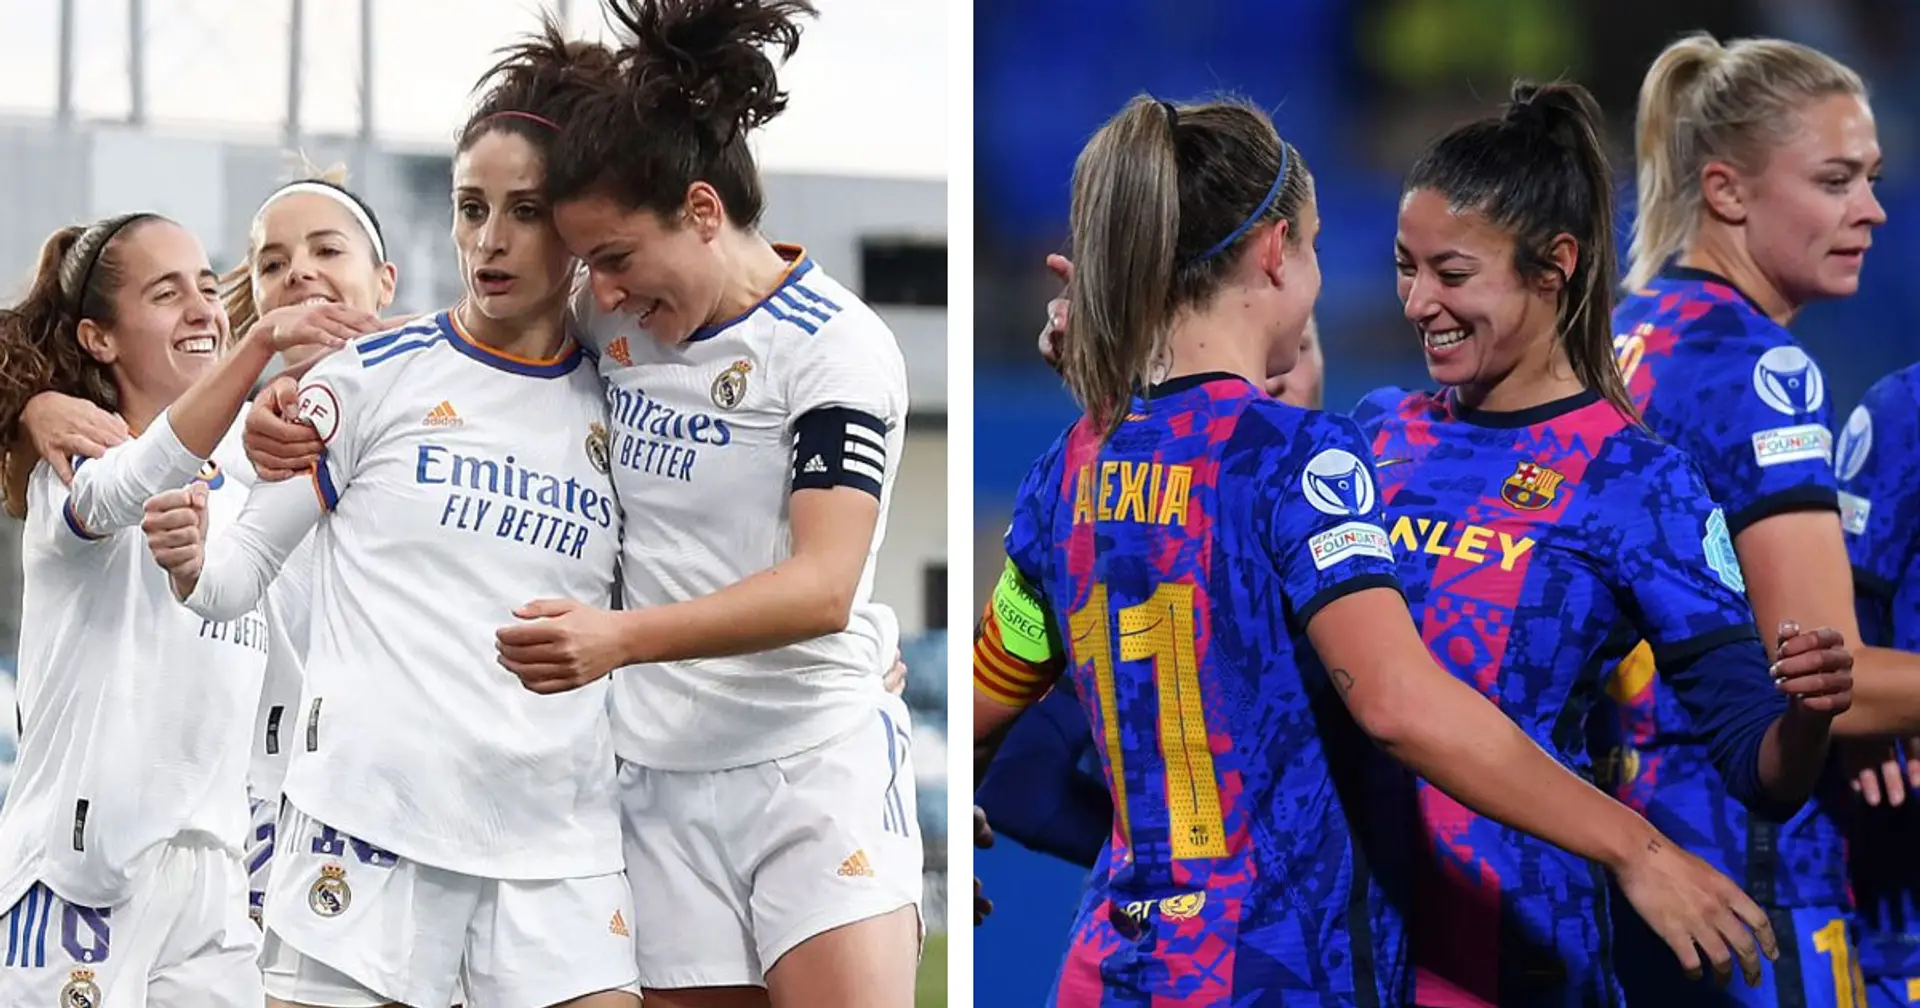 Barca femeni's UWCL clash announcement vs Real Madrid femenino sees 50,000 tickets sold in single day